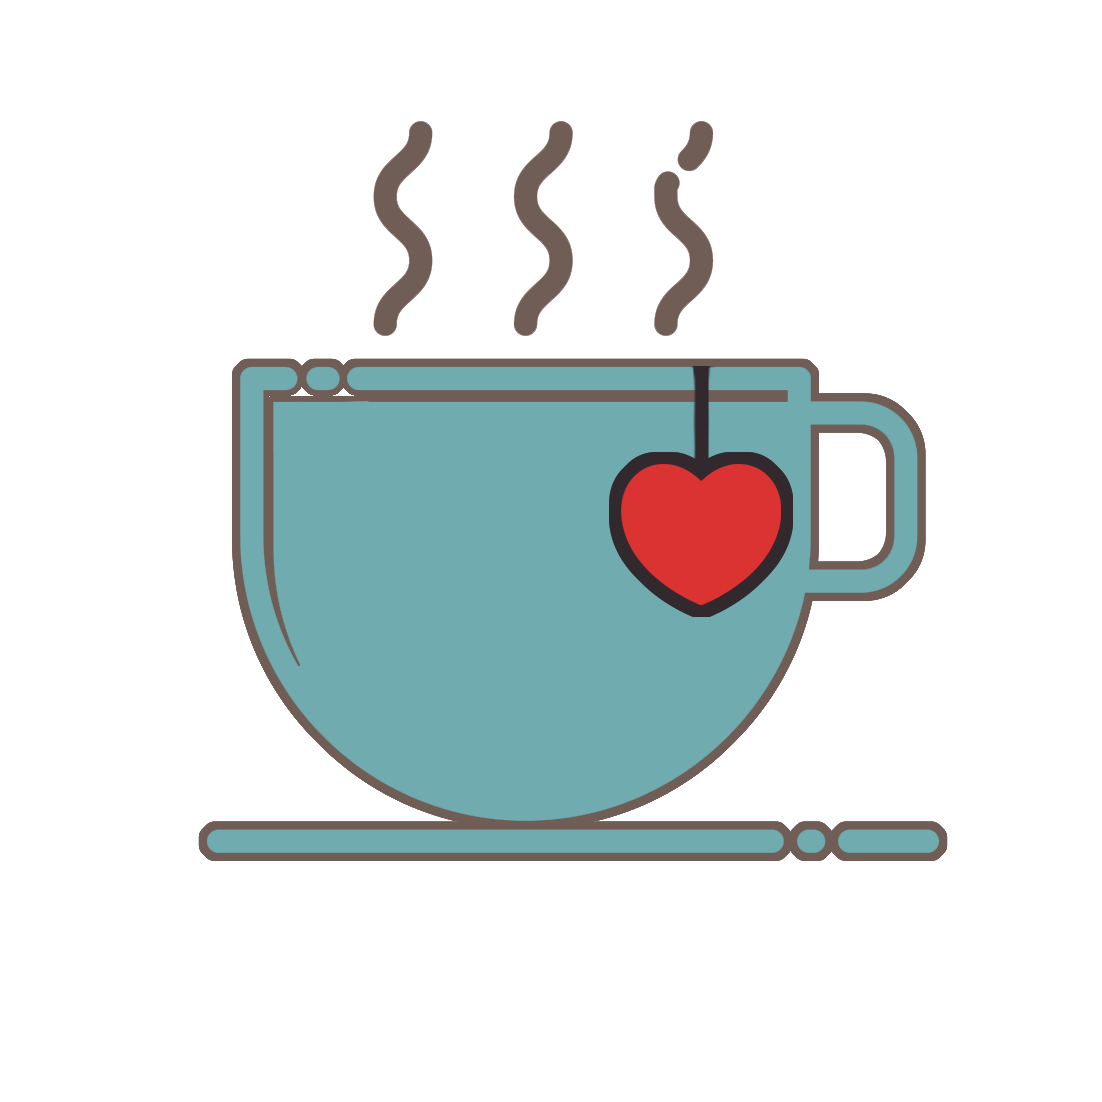 A steaming cup of tea with a red heart-shaped teabag tag in a blue cup.